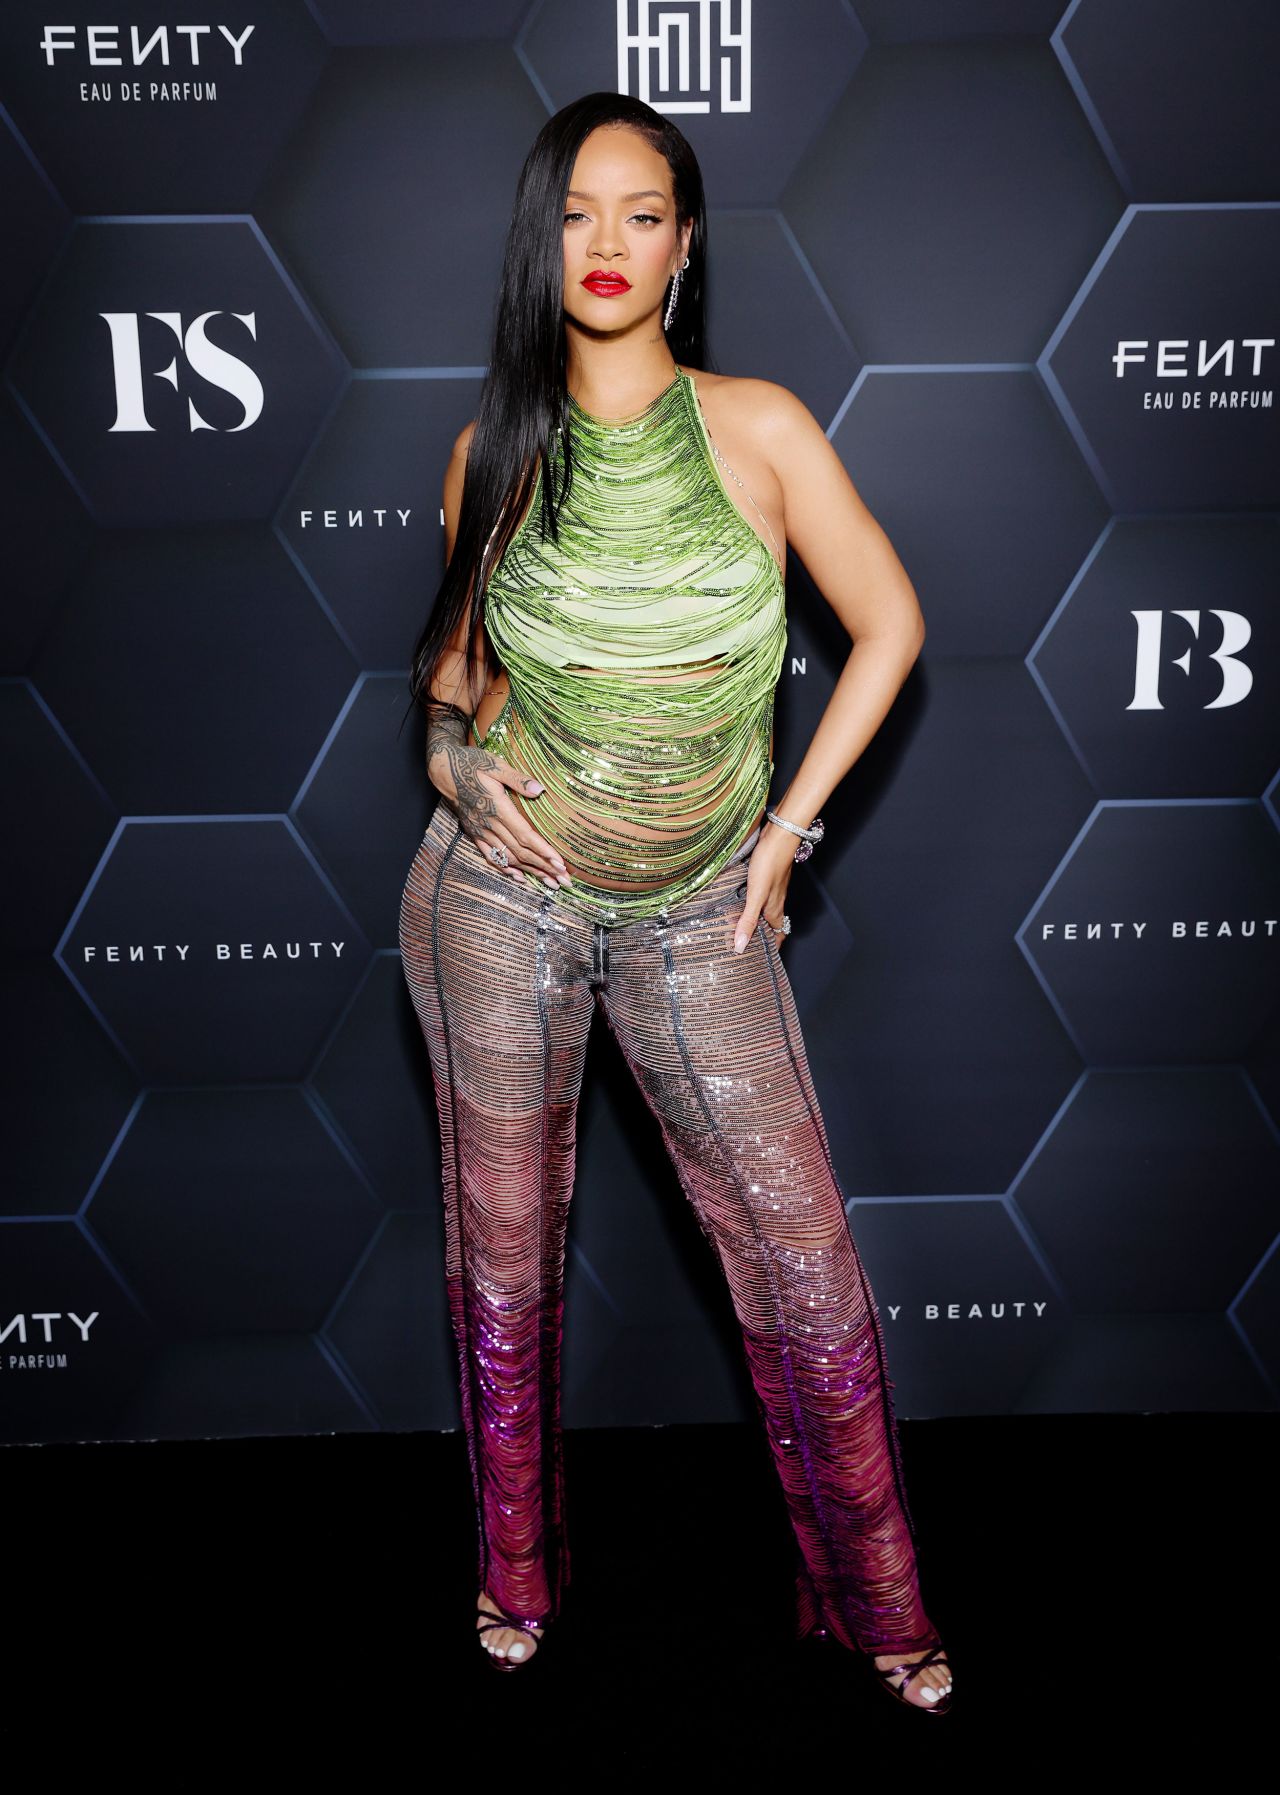 That same month, Rihanna turned heads at a Fenty Beauty Universe Event in a metallic fringe set by The Atitco. She accessorized the curve hugging green halter top and silver purple pants with chopard earrings and gold body jewelry.